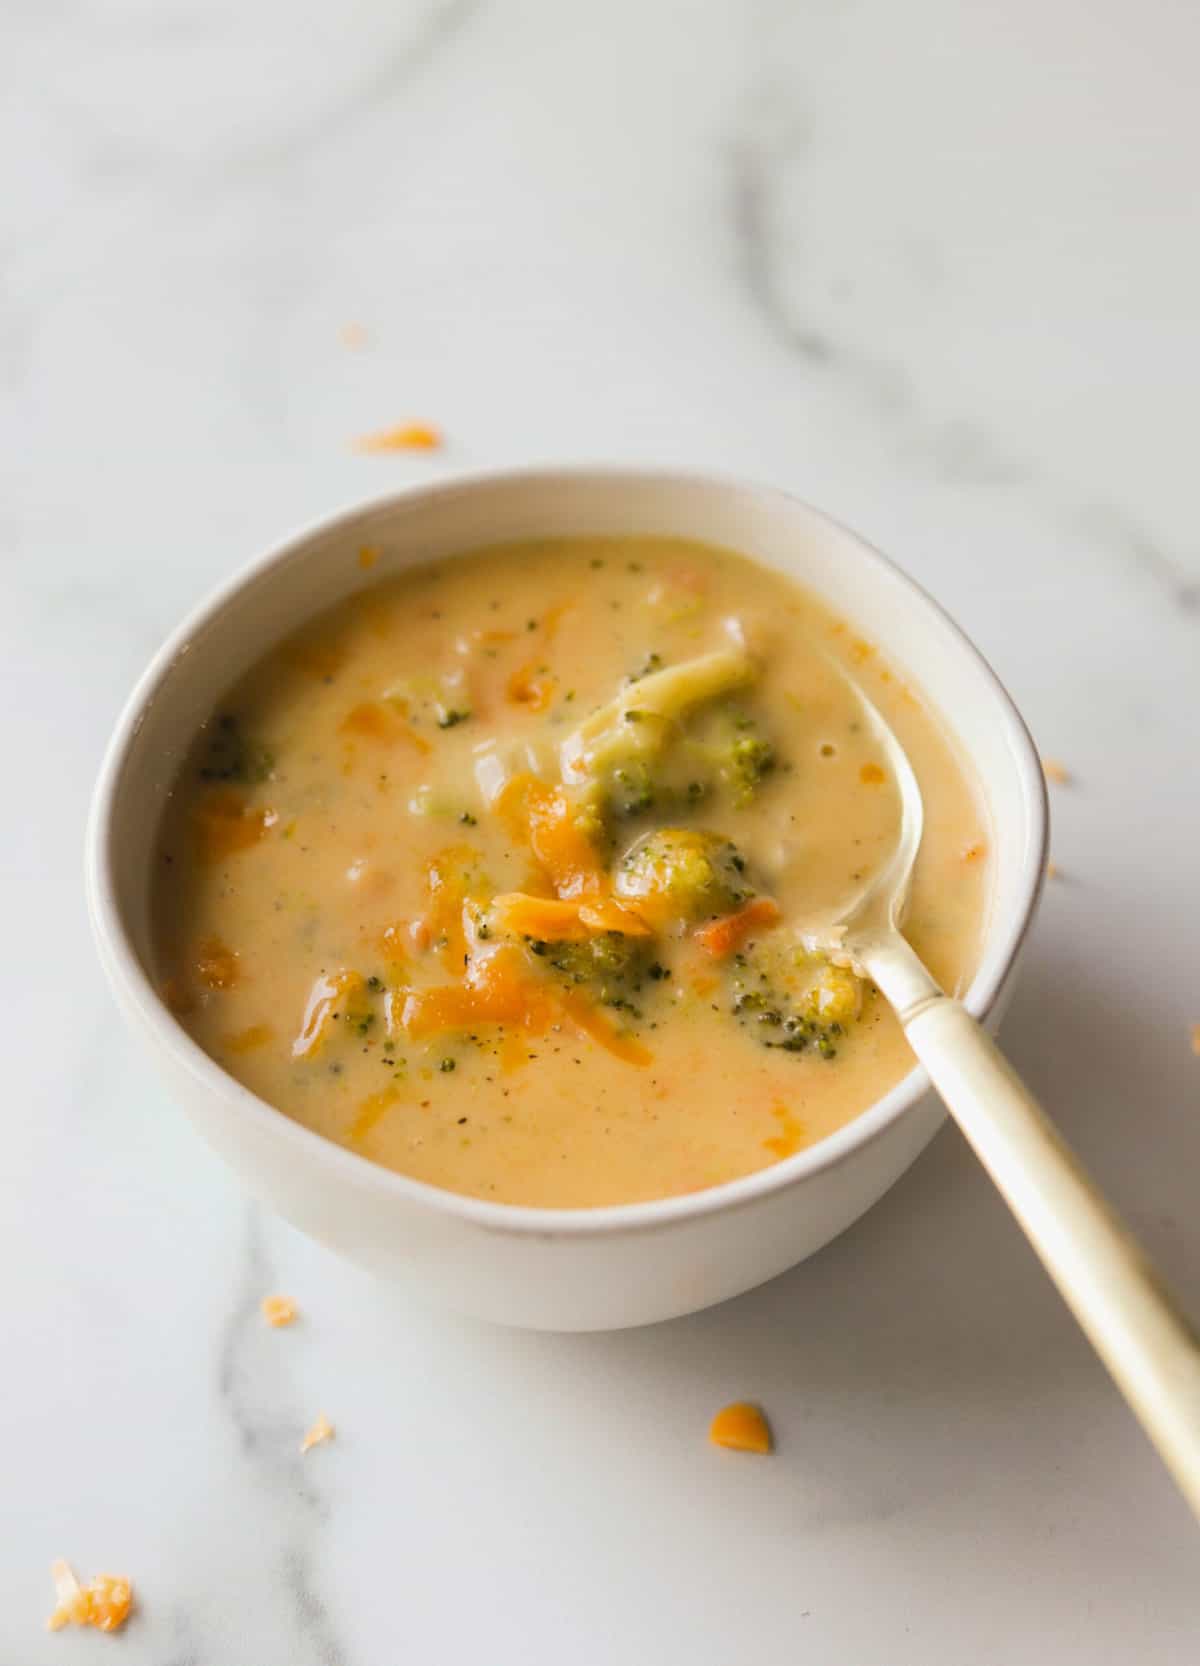 A side shot of a bowl of broccoli cheese soup with a spoon.